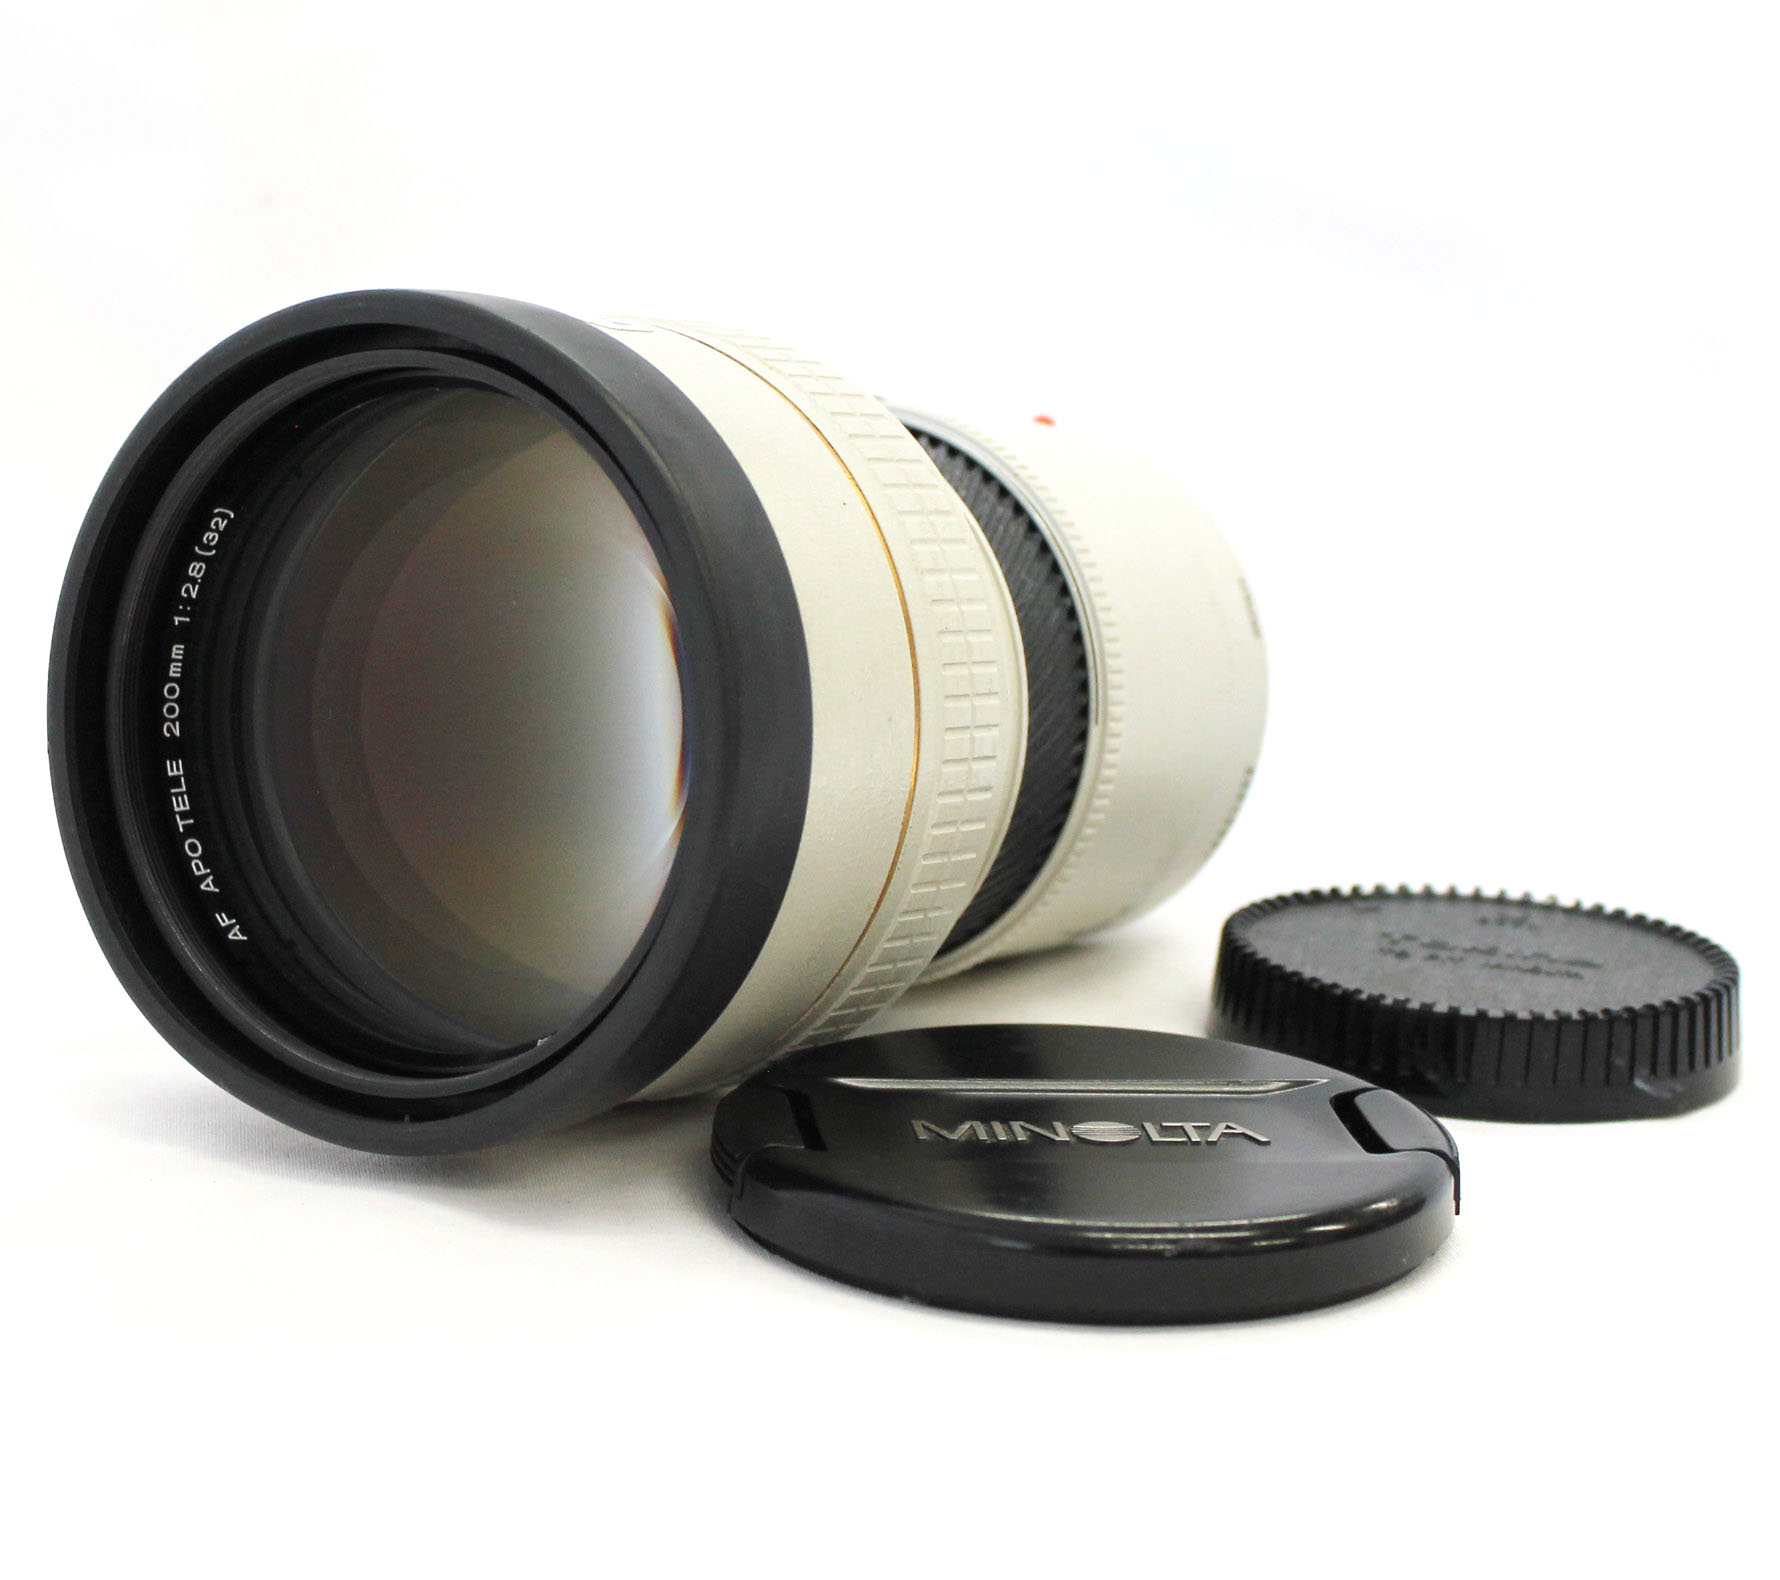 Japan Used Camera Shop | Minolta High Speed AF APO TELE 200mm F/2.8 Lens for Minolta / Sony A mount from Japan